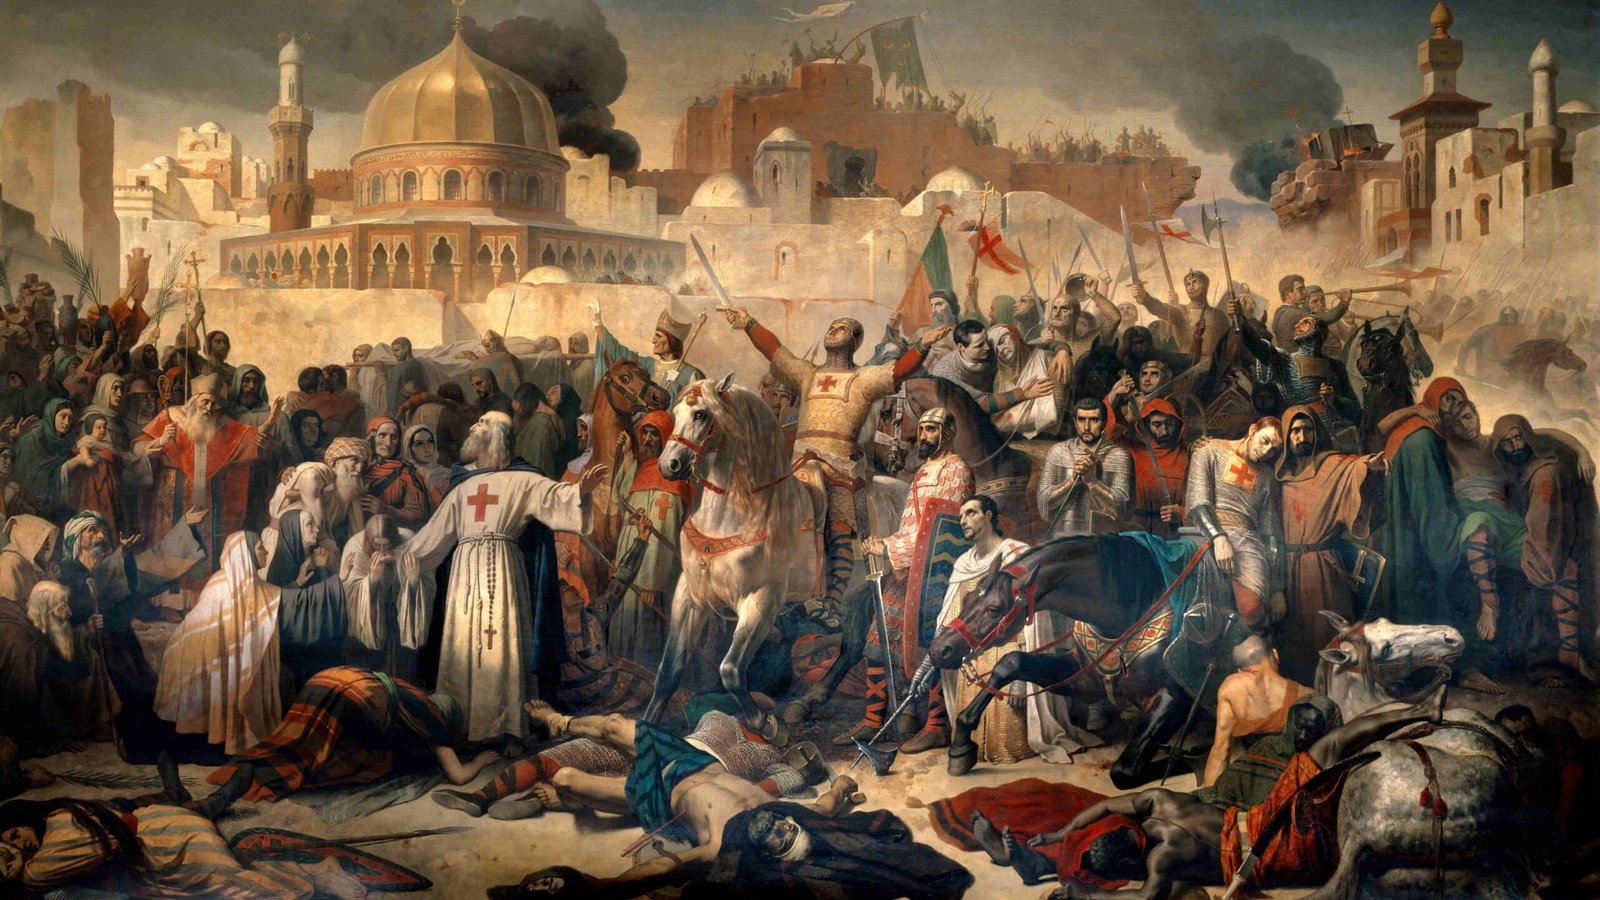 Timeline of the Crusades: Major Battles and Events